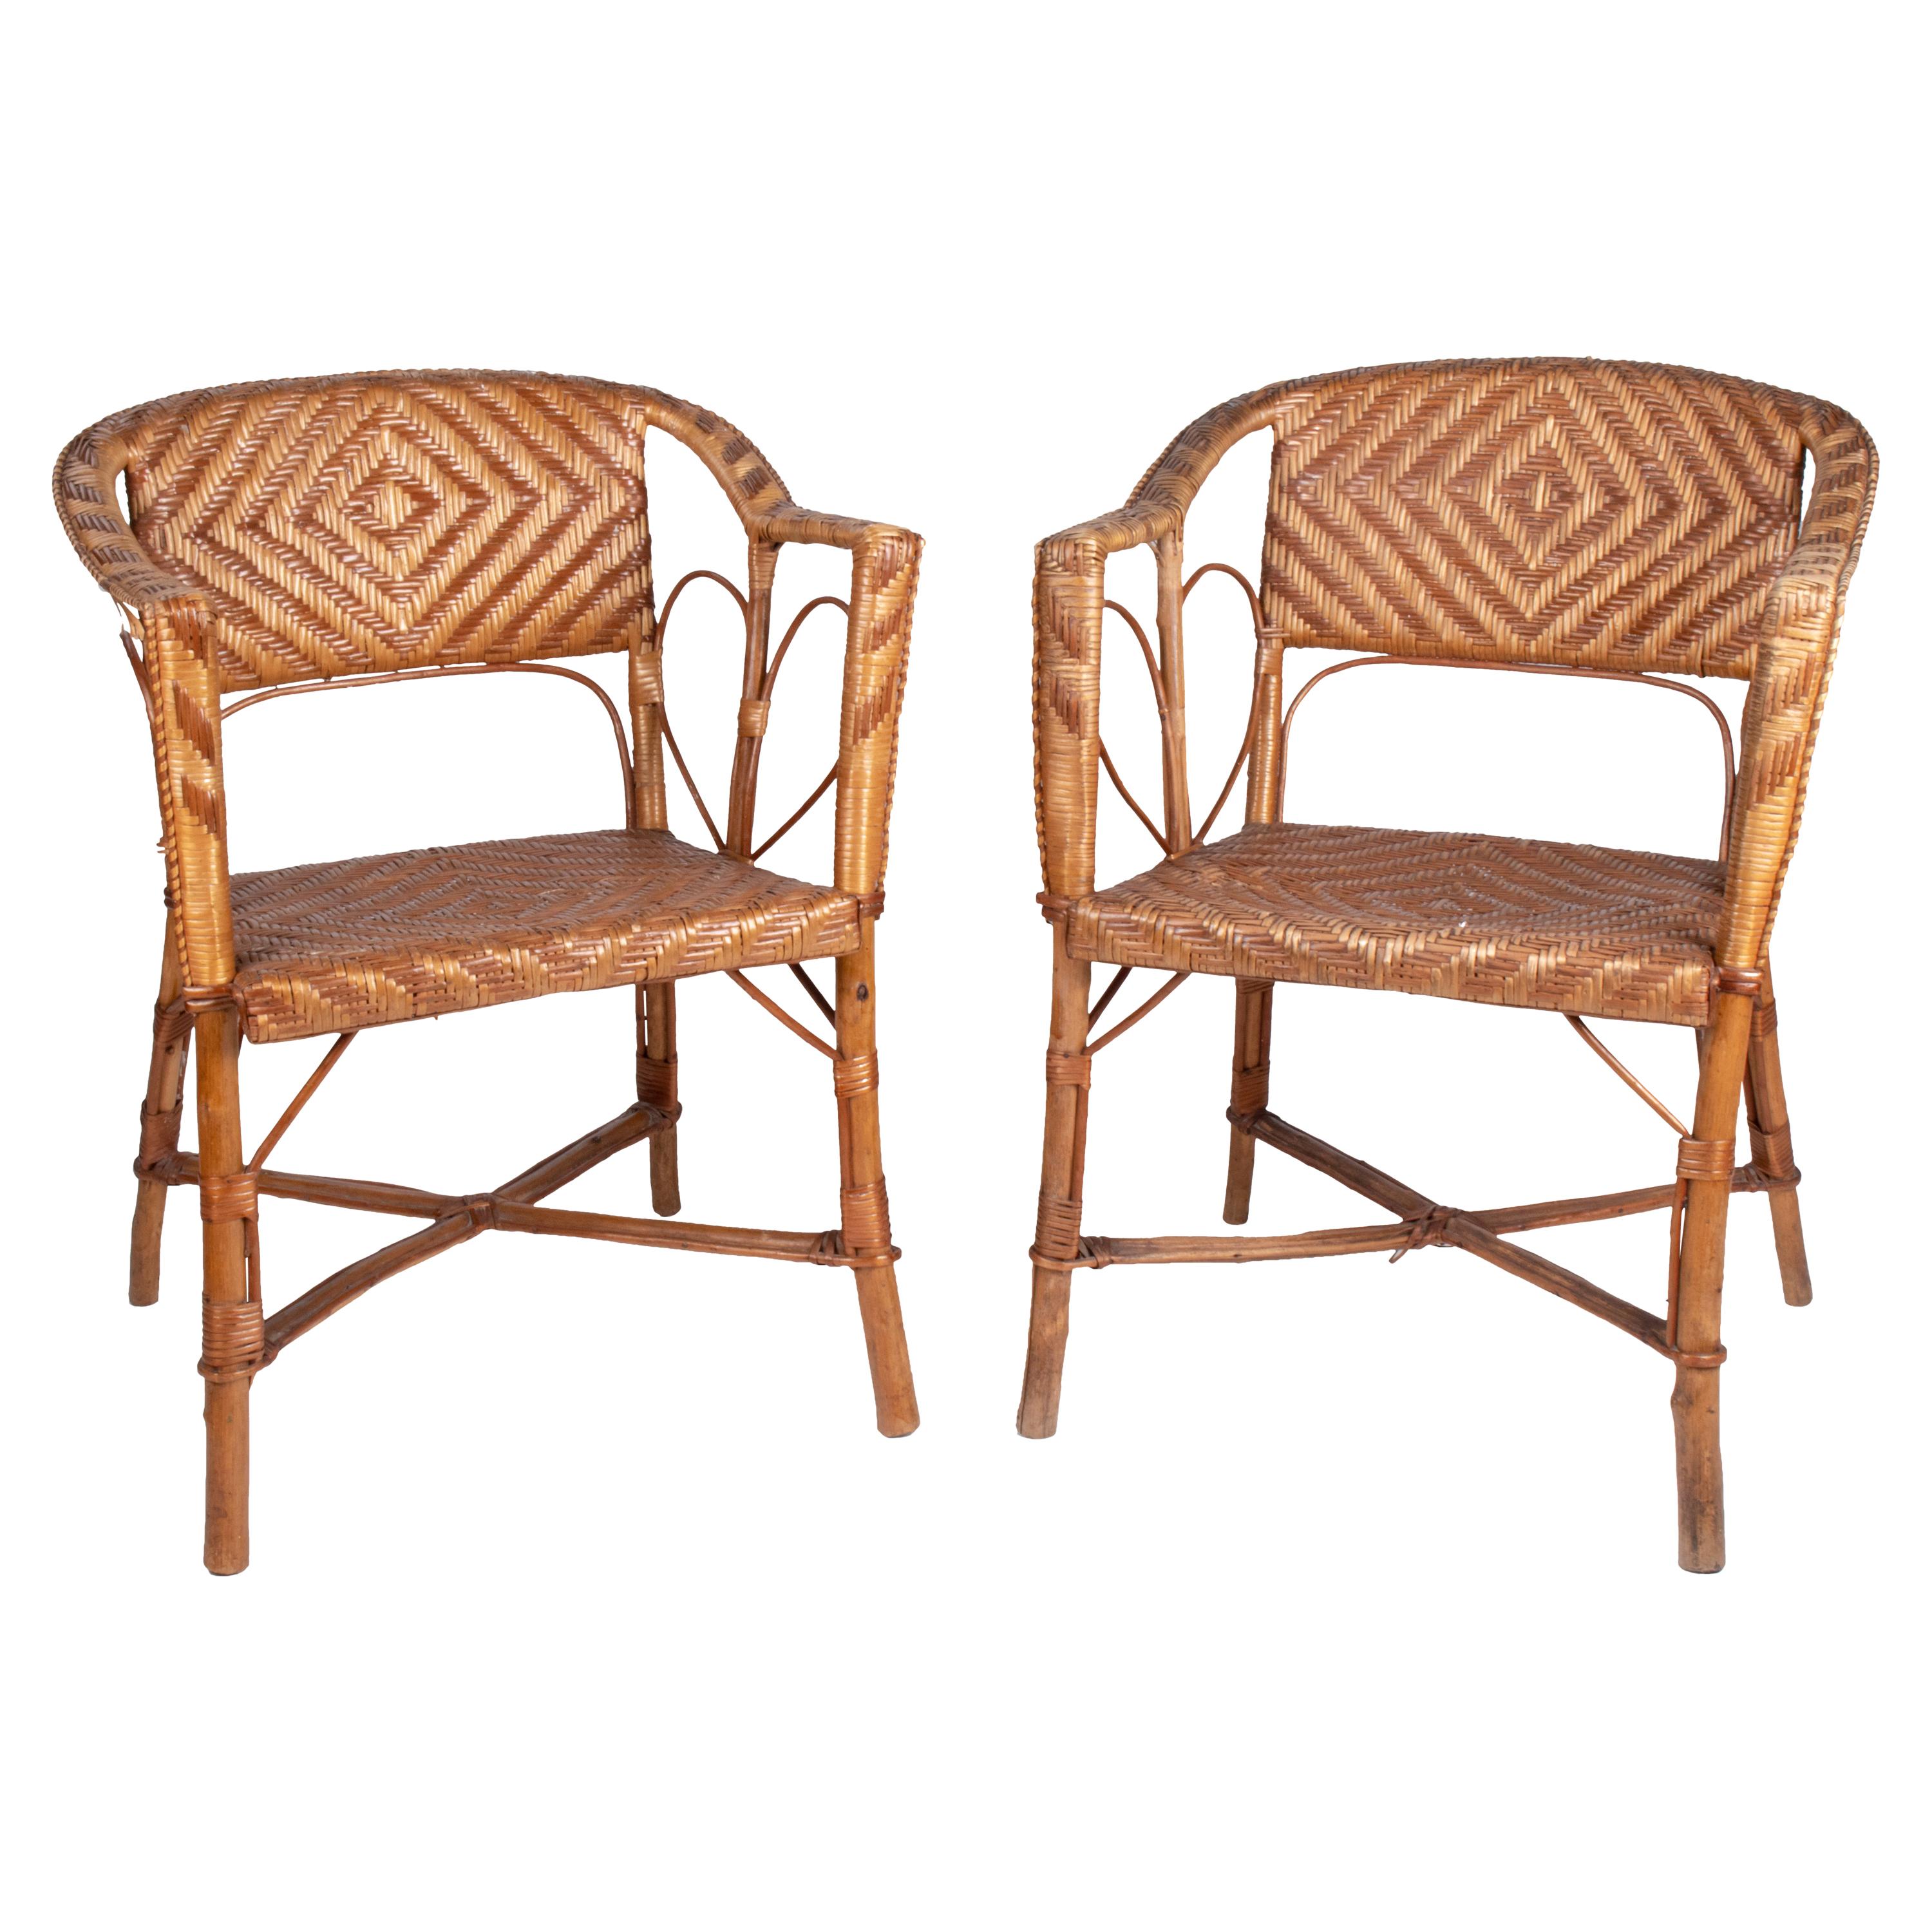 1950s Spanish Pair of Wicker on Wood Frame Chairs 